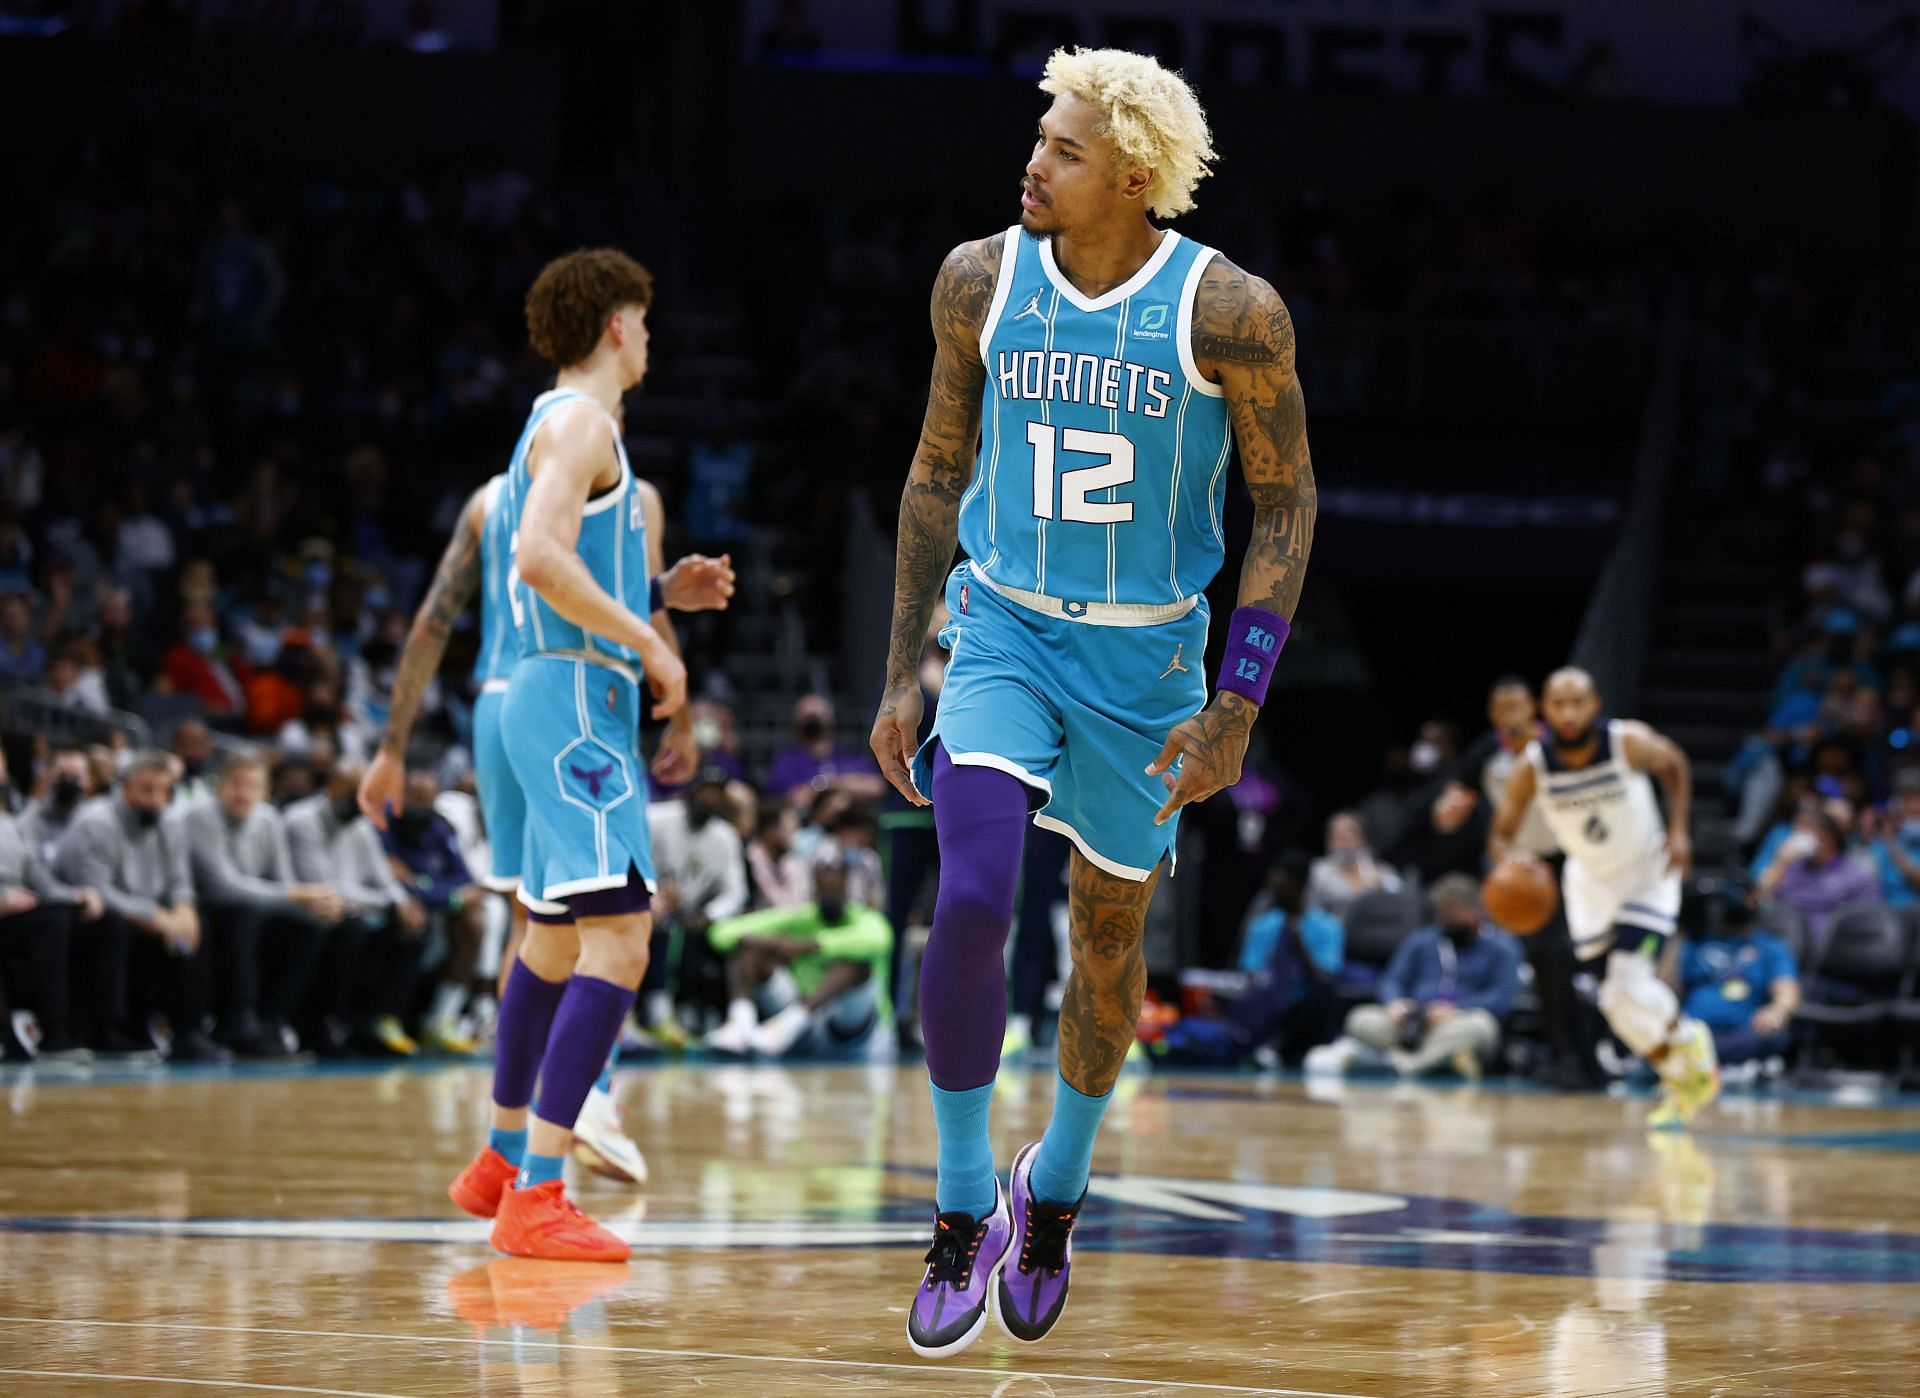 Kelly Oubre celebrates a play at the Minnesota Timberwolves v Charlotte Hornets game